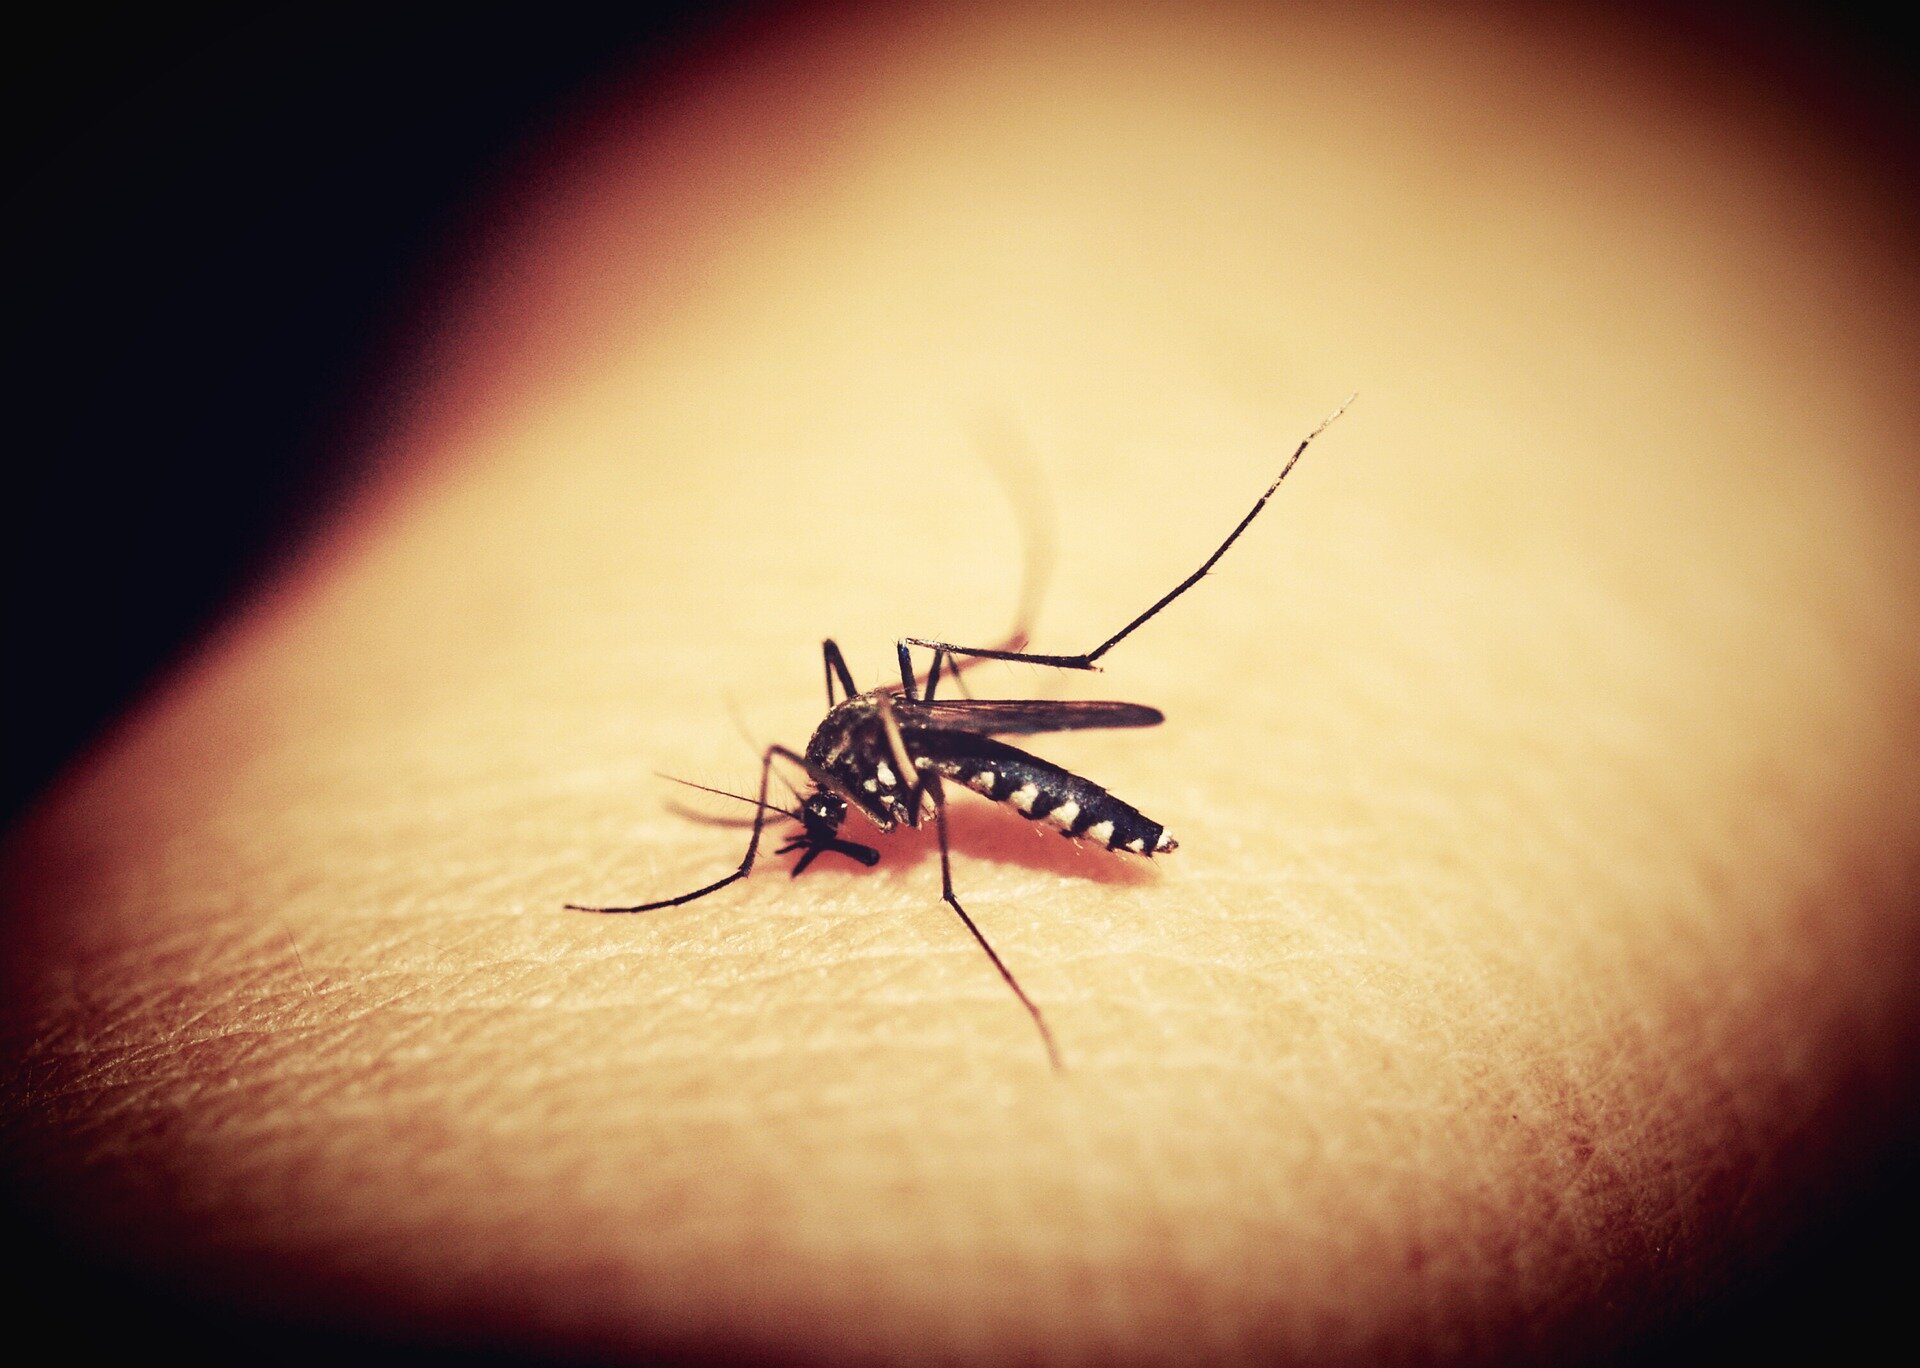 Monoclonal antibody shown to be effective against malaria for up to six months